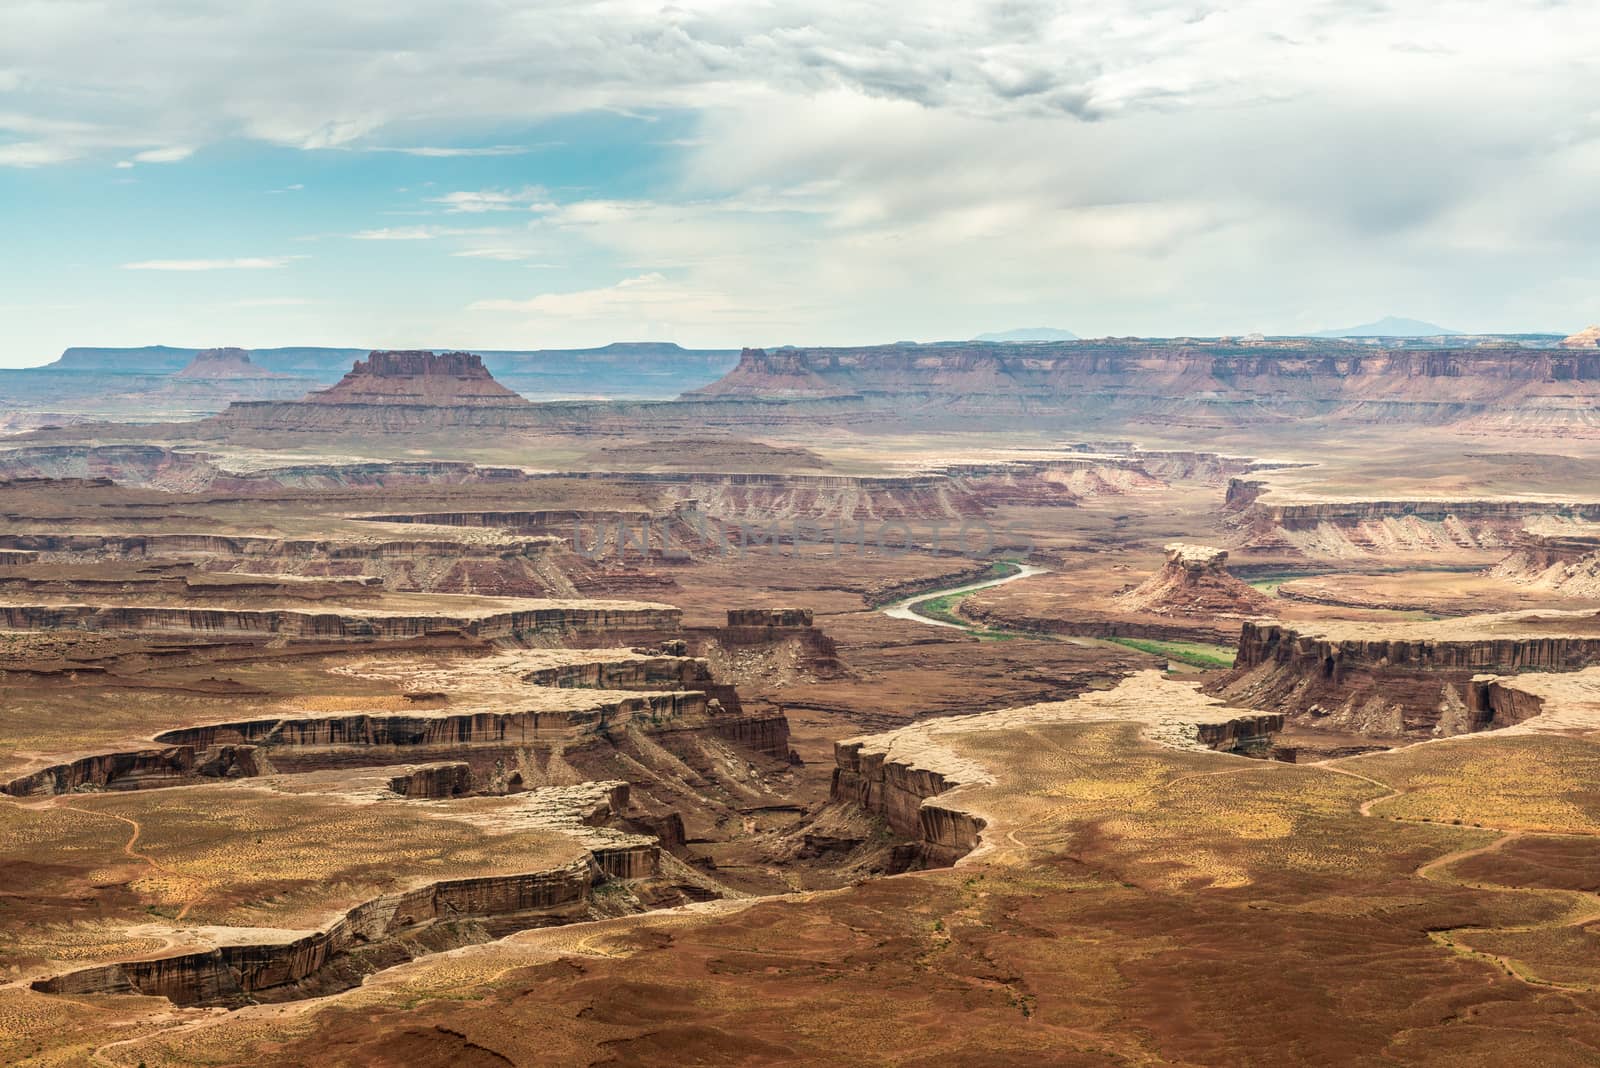 Green River Overlook in Canyonlands National Park, Utah by Njean